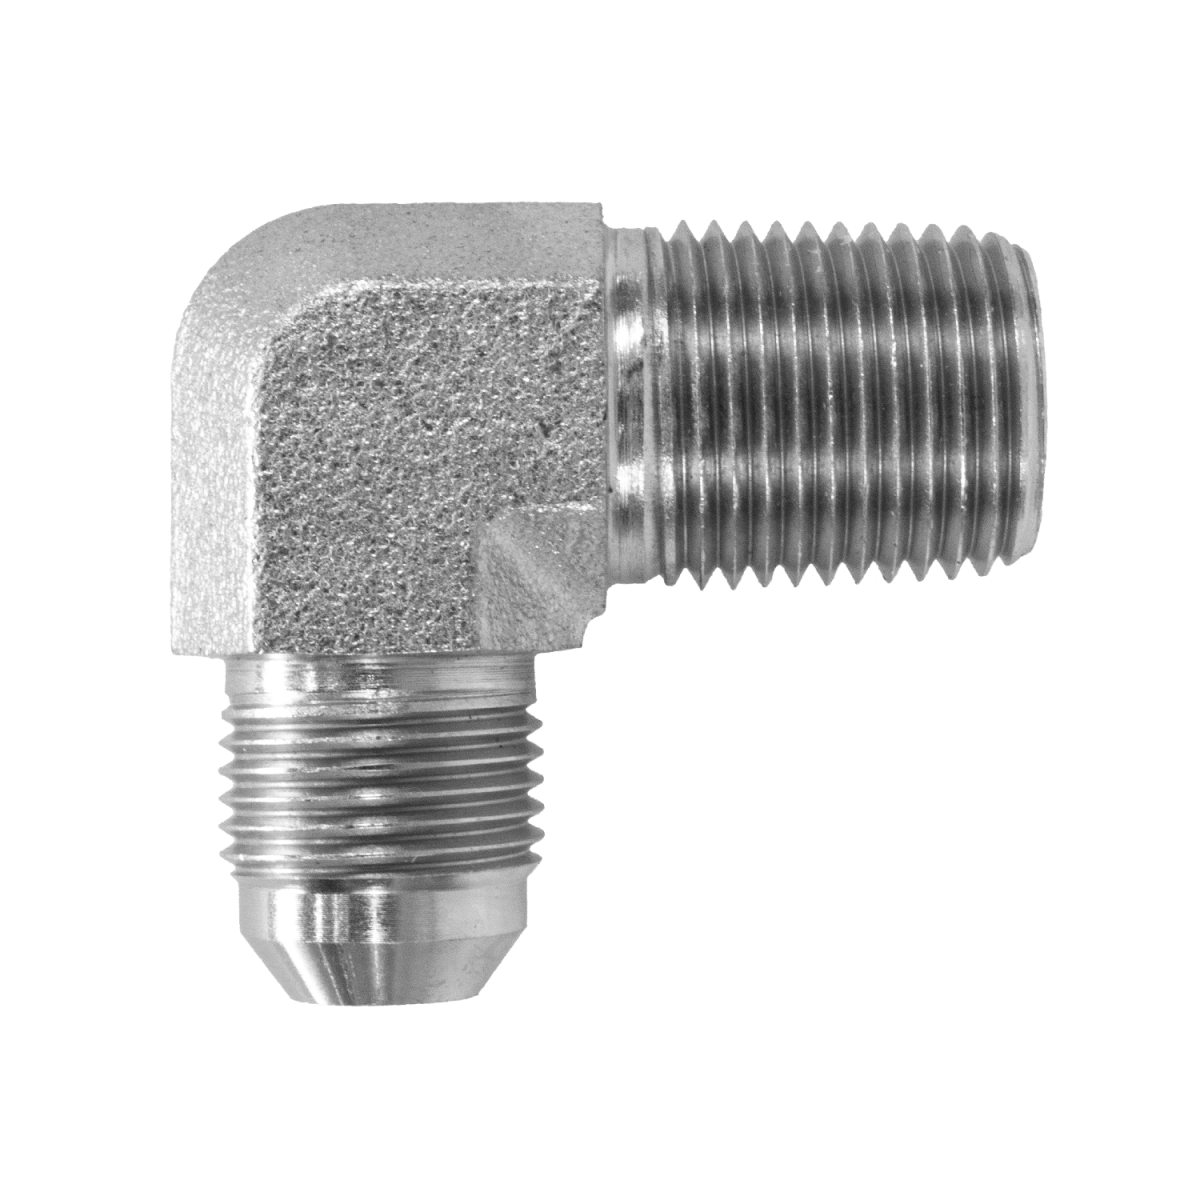 2501-adapters-fittings